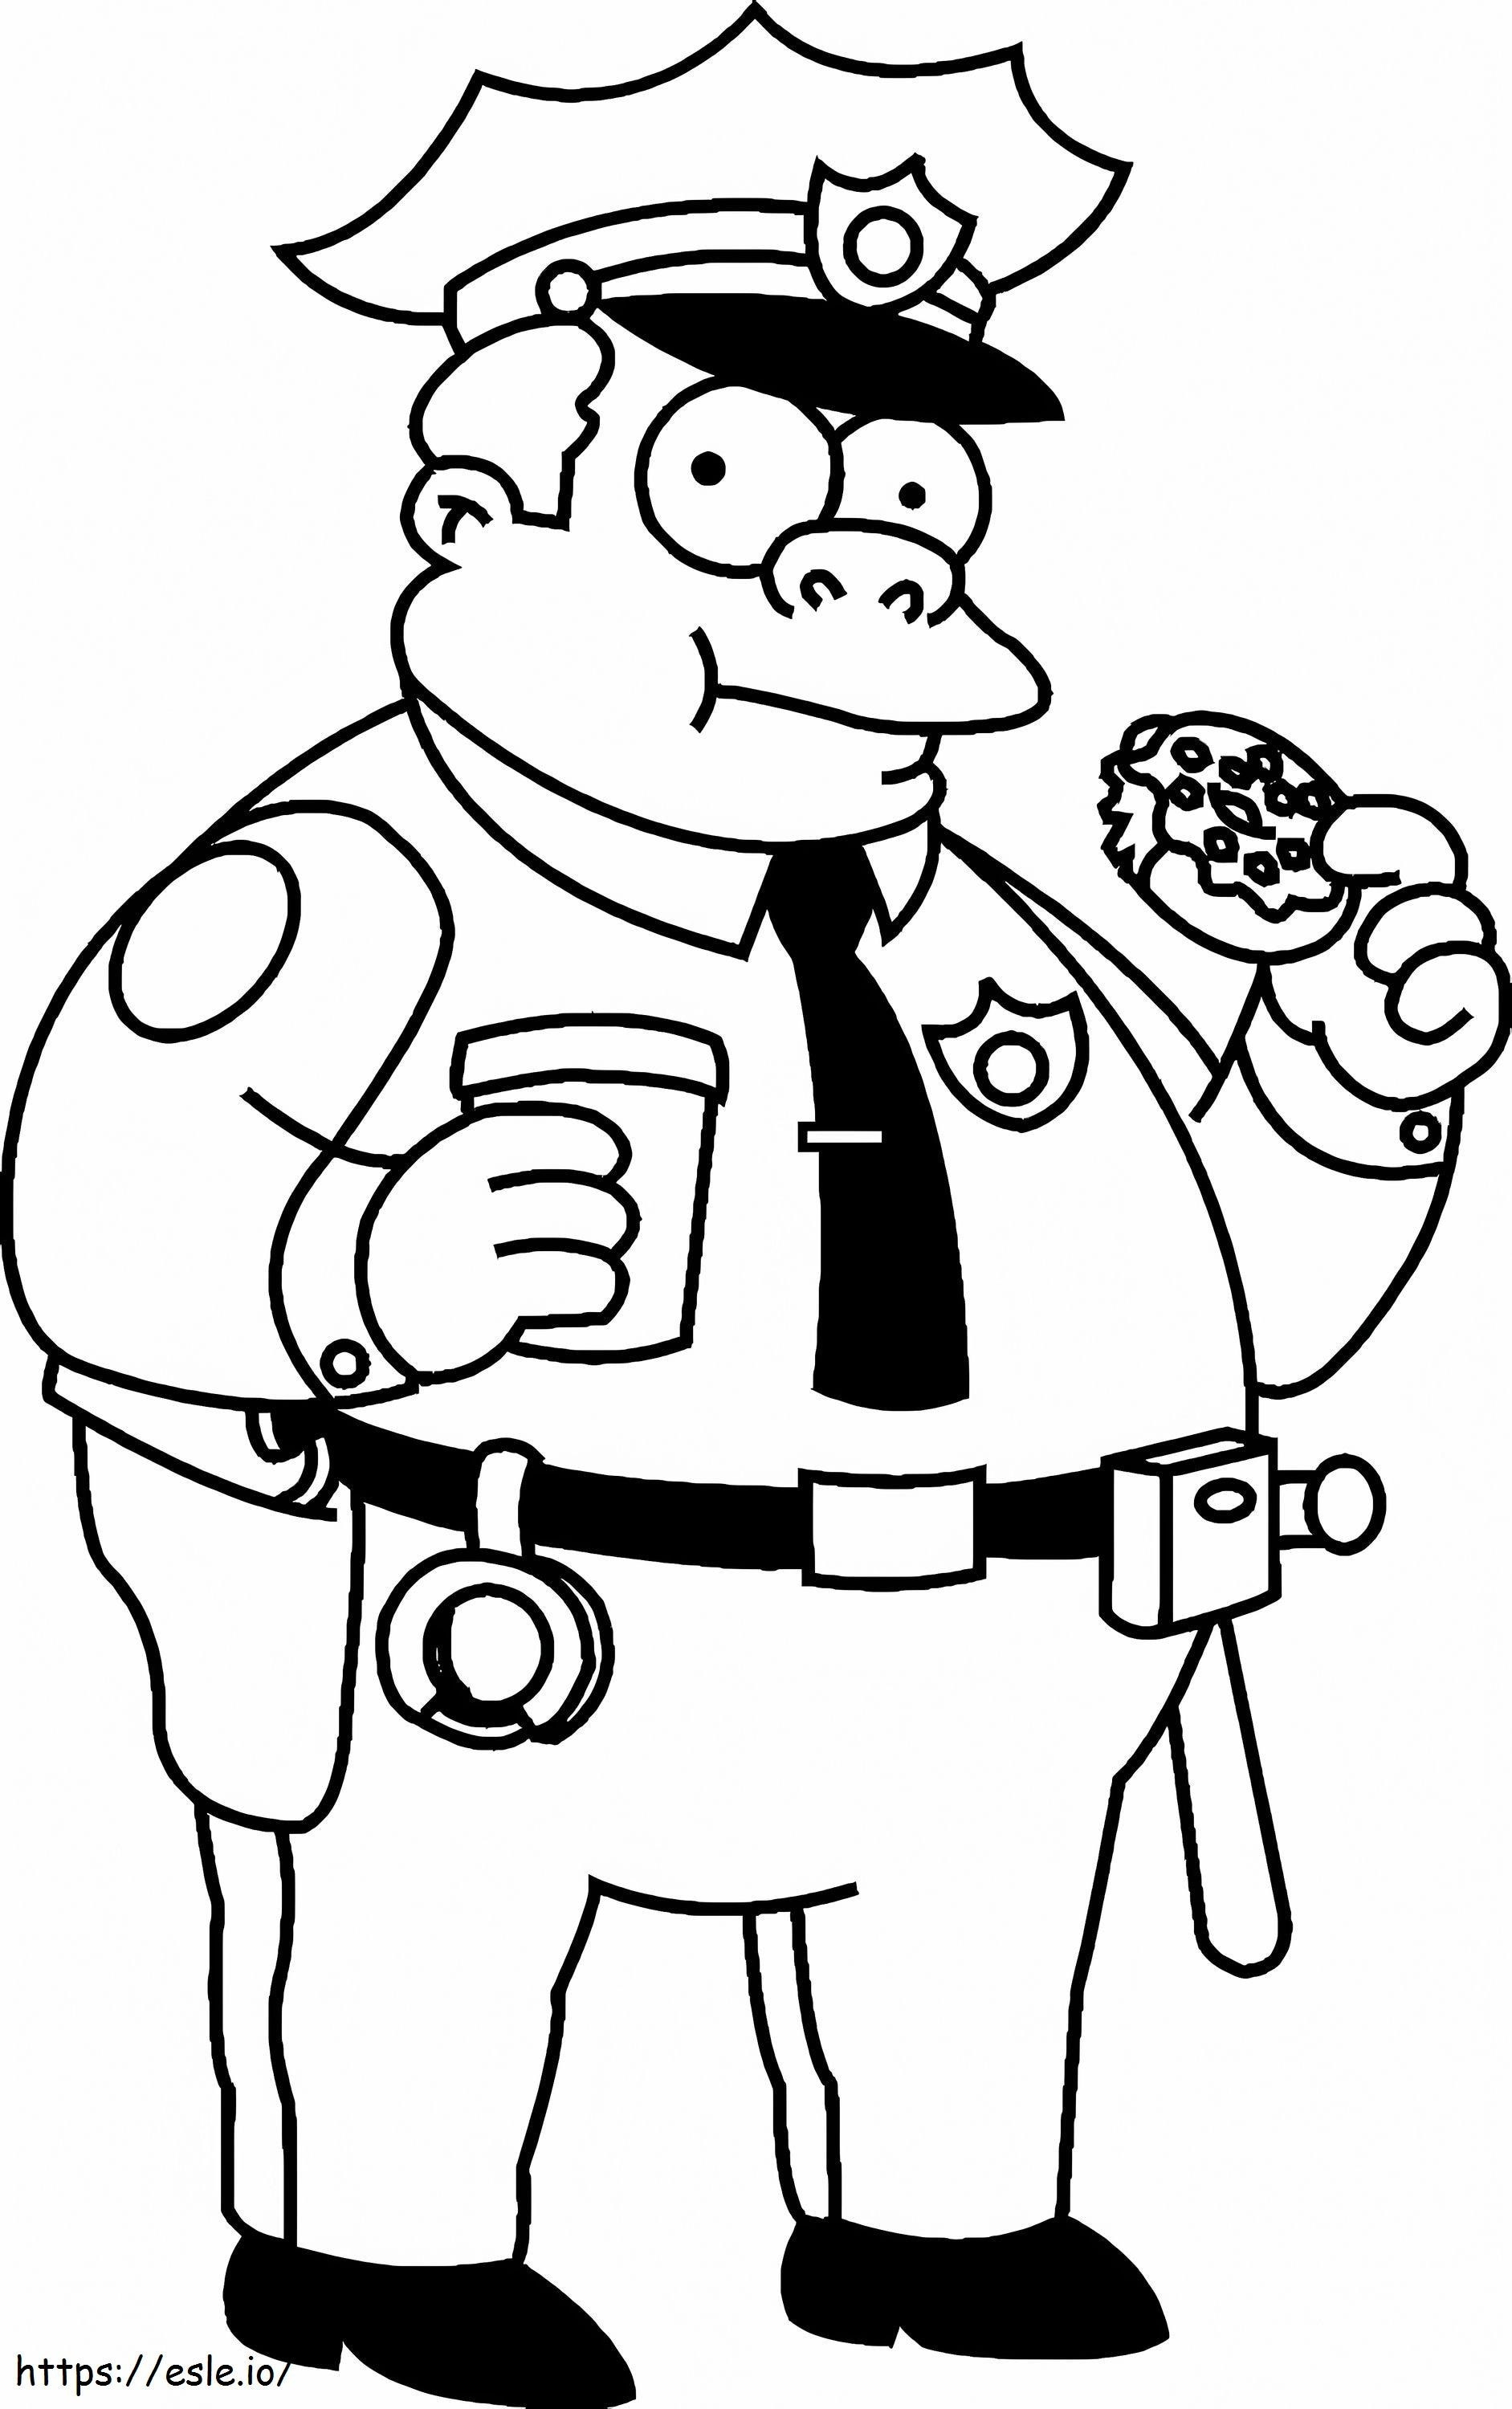 Policeman Eating Simpsons Donut coloring page